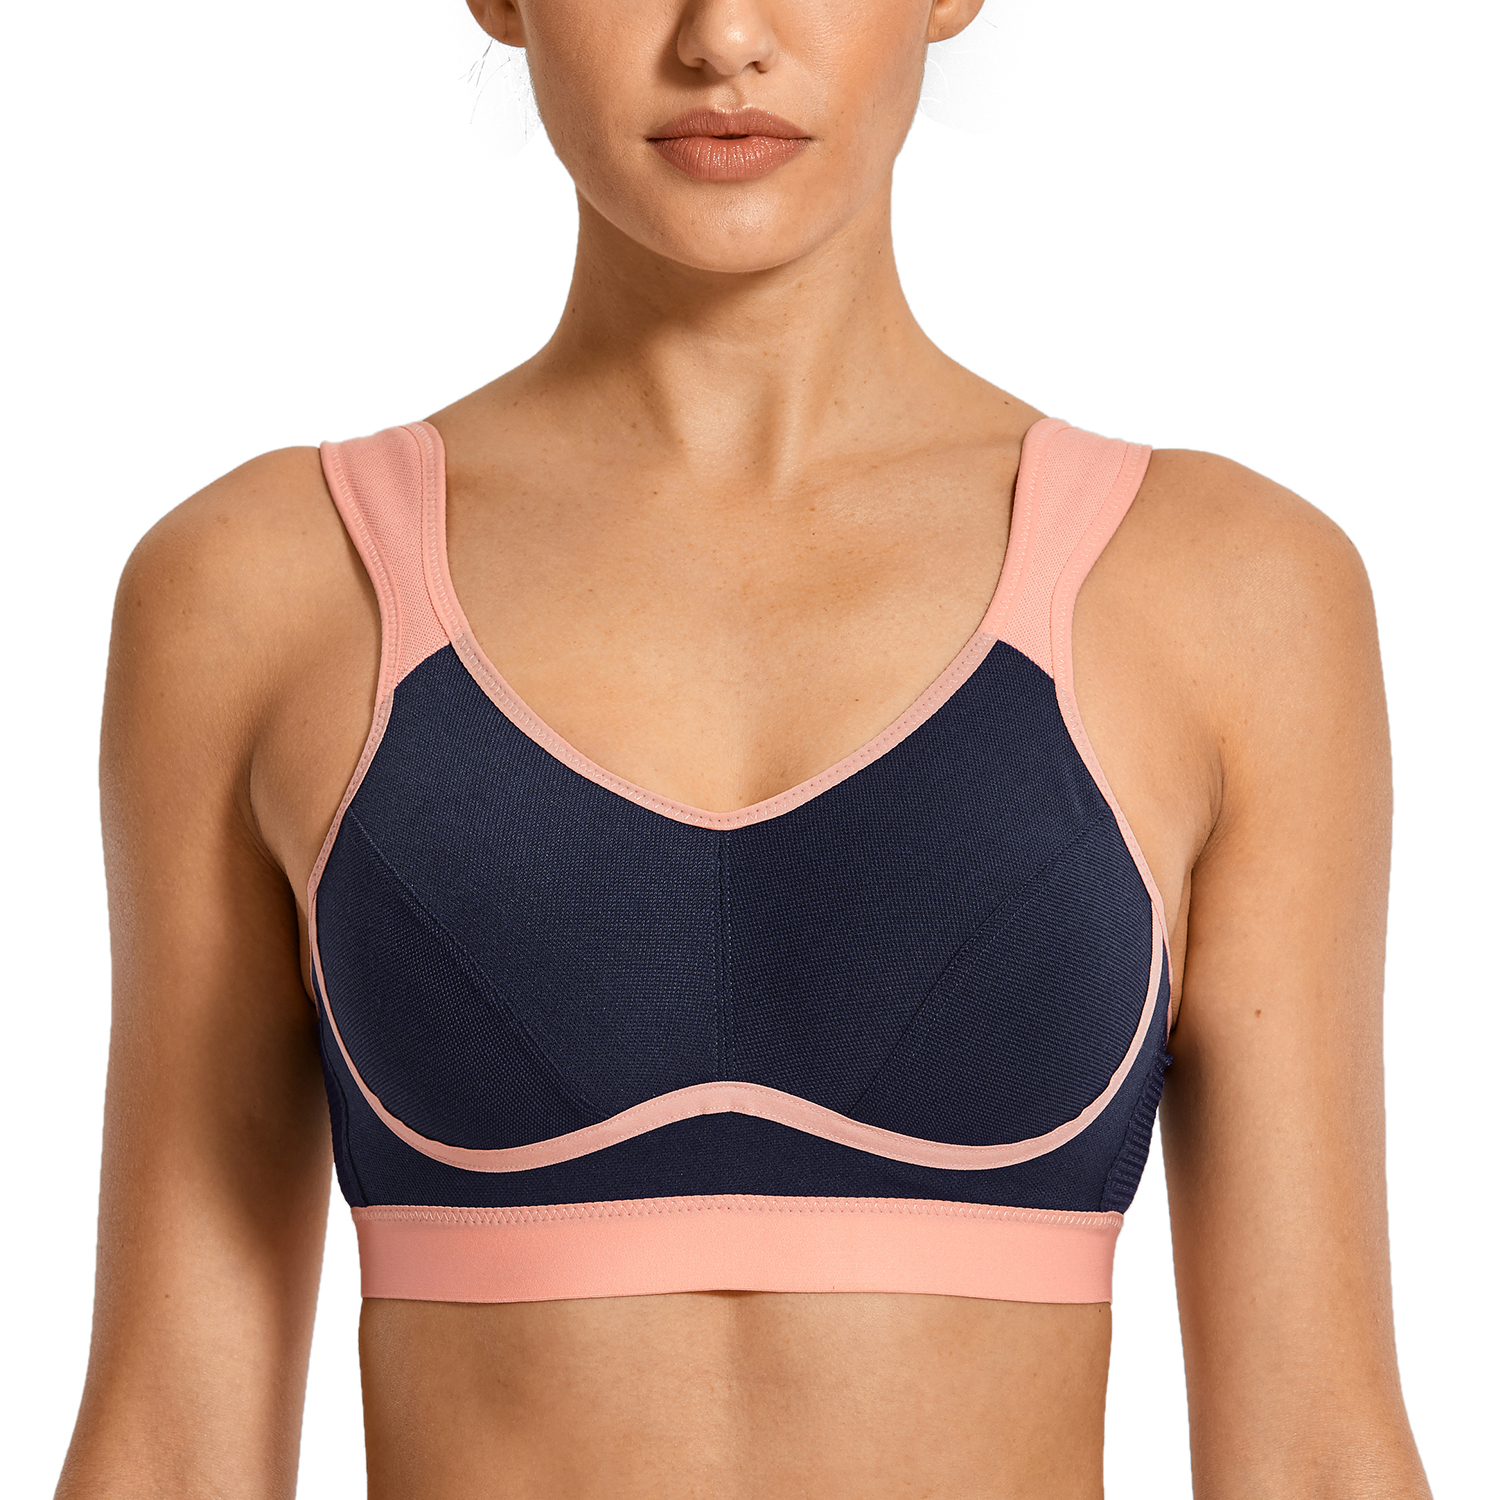 Women's Sports Bra High Impact Support Wirefree Bounce Control Plus Size  Workout | eBay